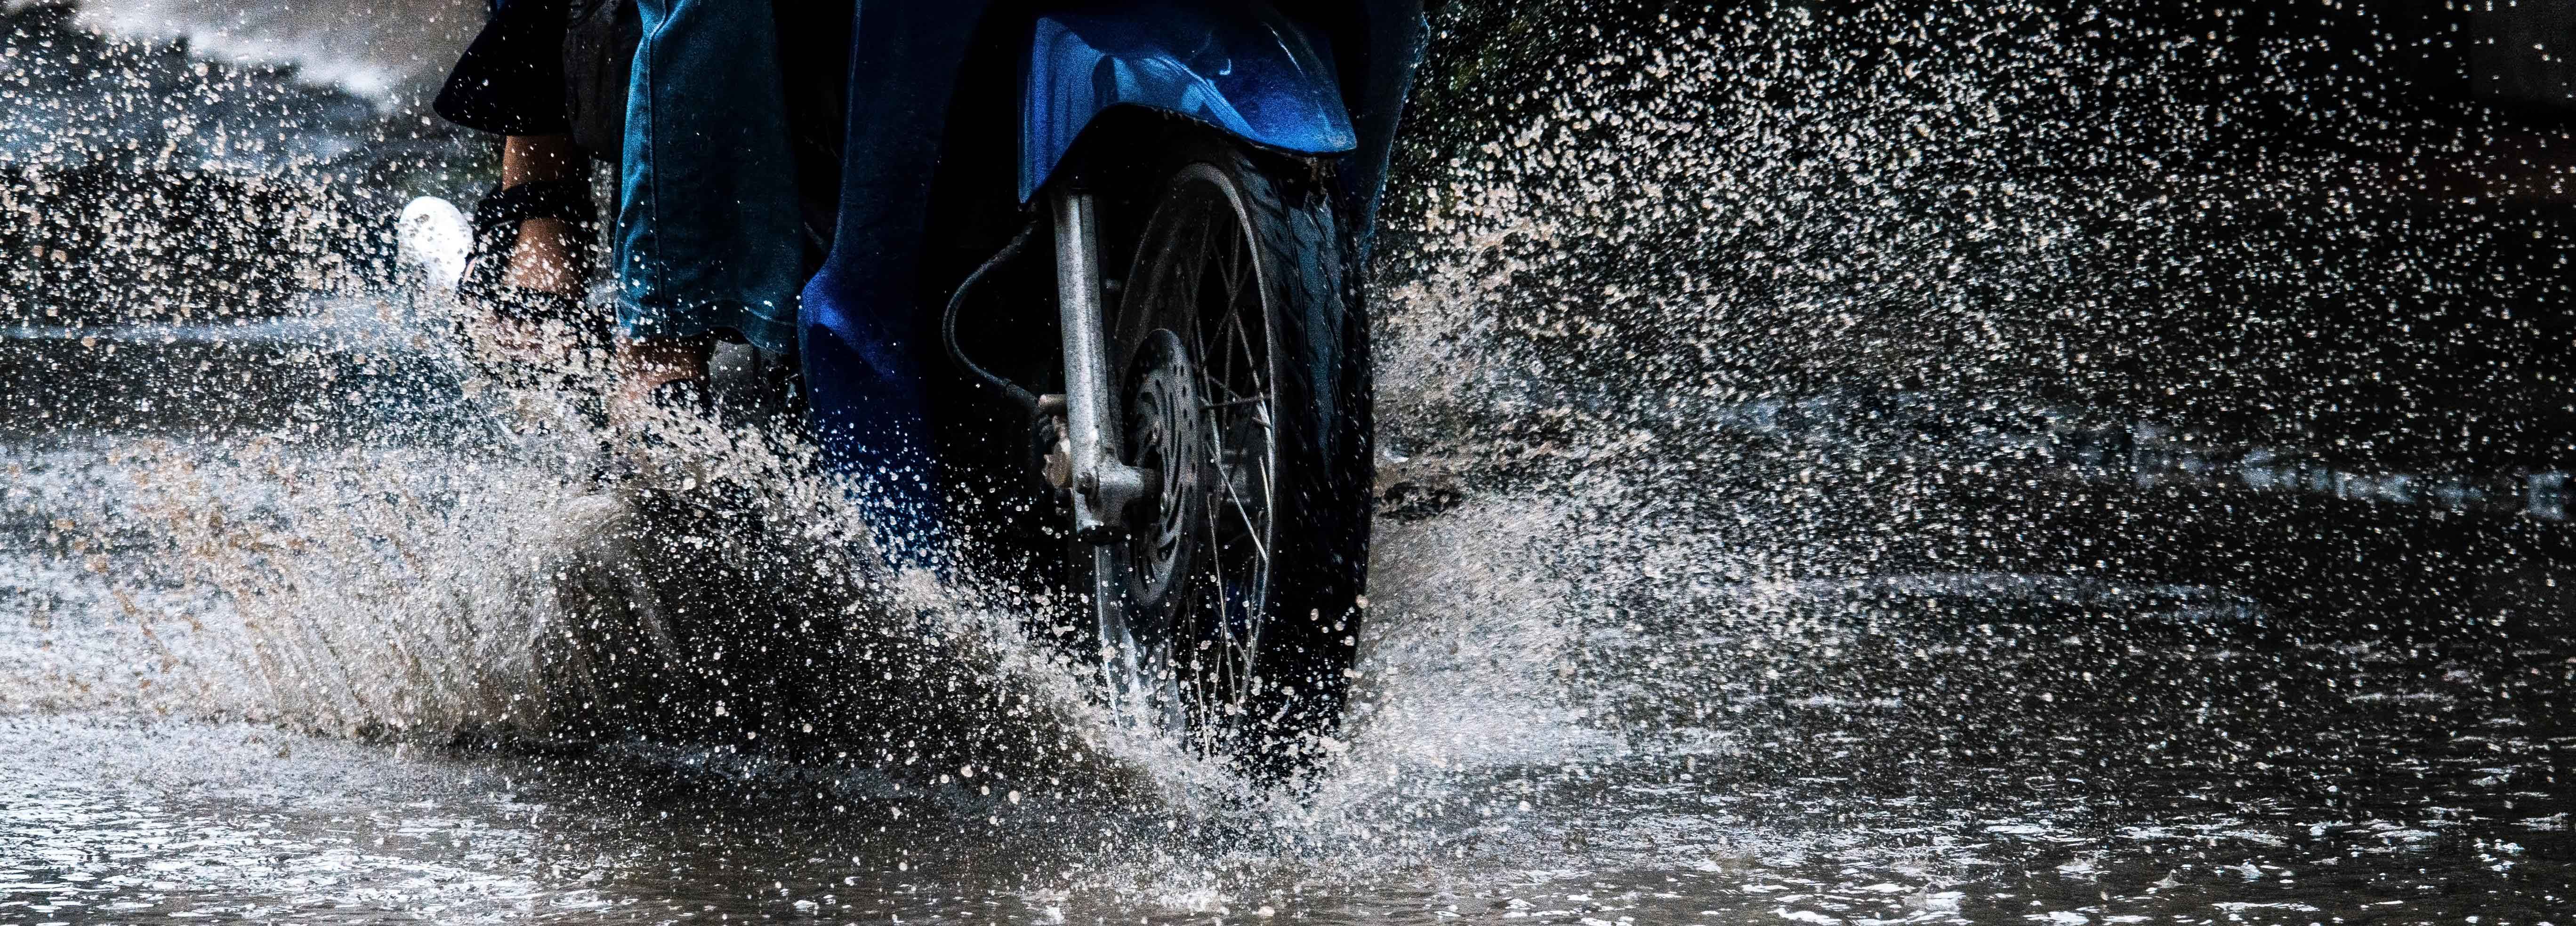 motorcycle going down the road splashing water from the front wheel in a rainstorm